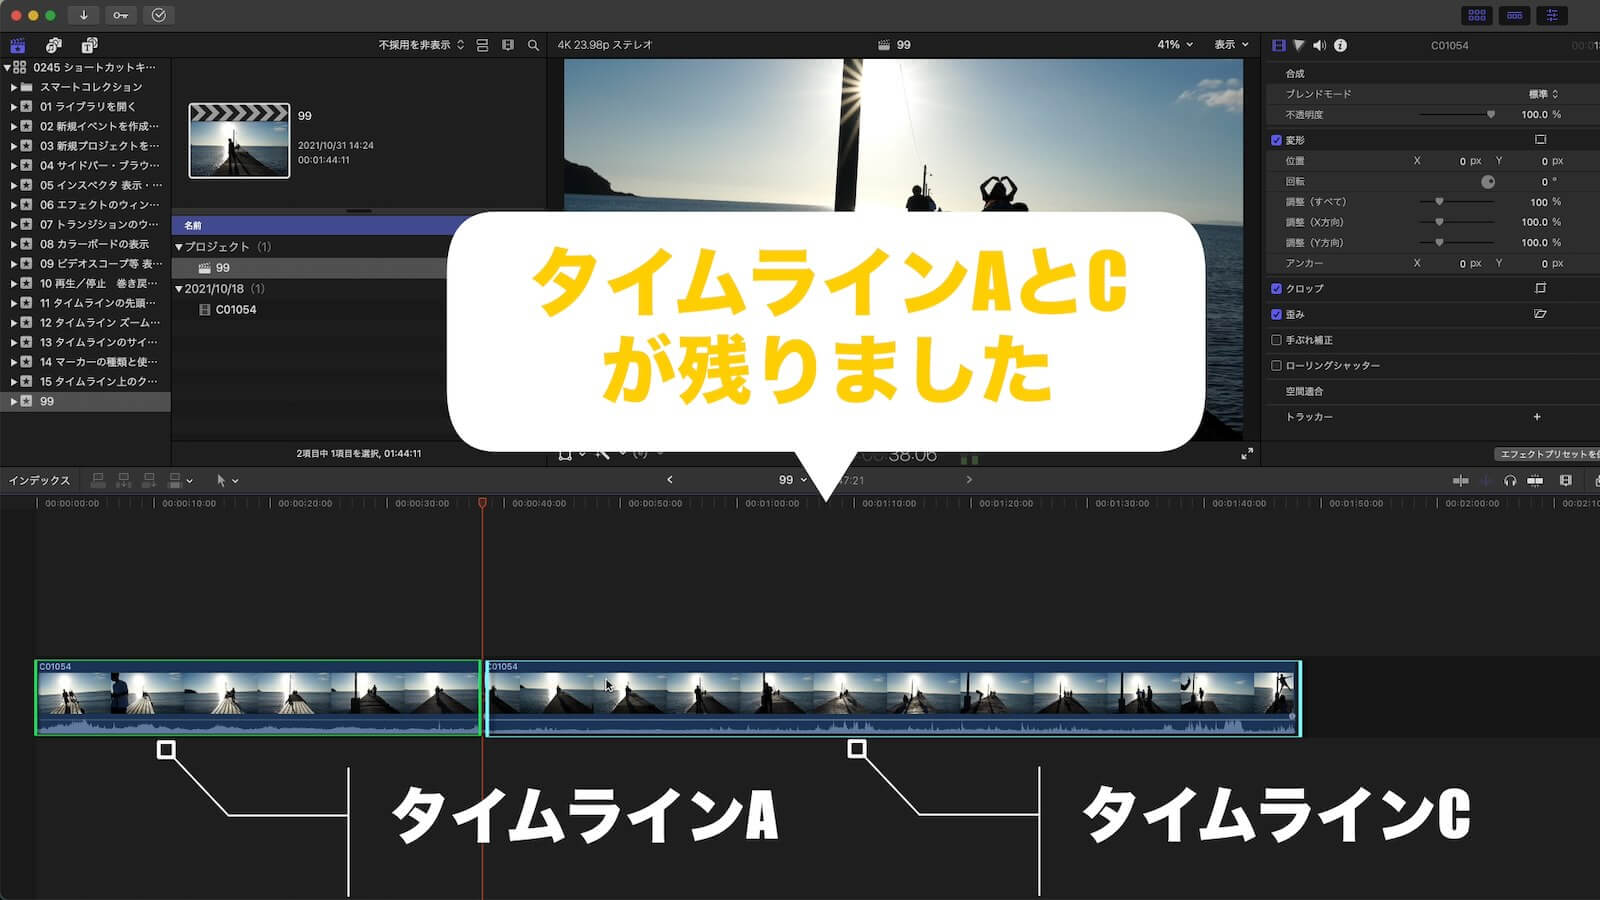 Final Cut Pro Image with the part you want to cut selected
Image of timeline truncated by Final Cut Pro blade feature